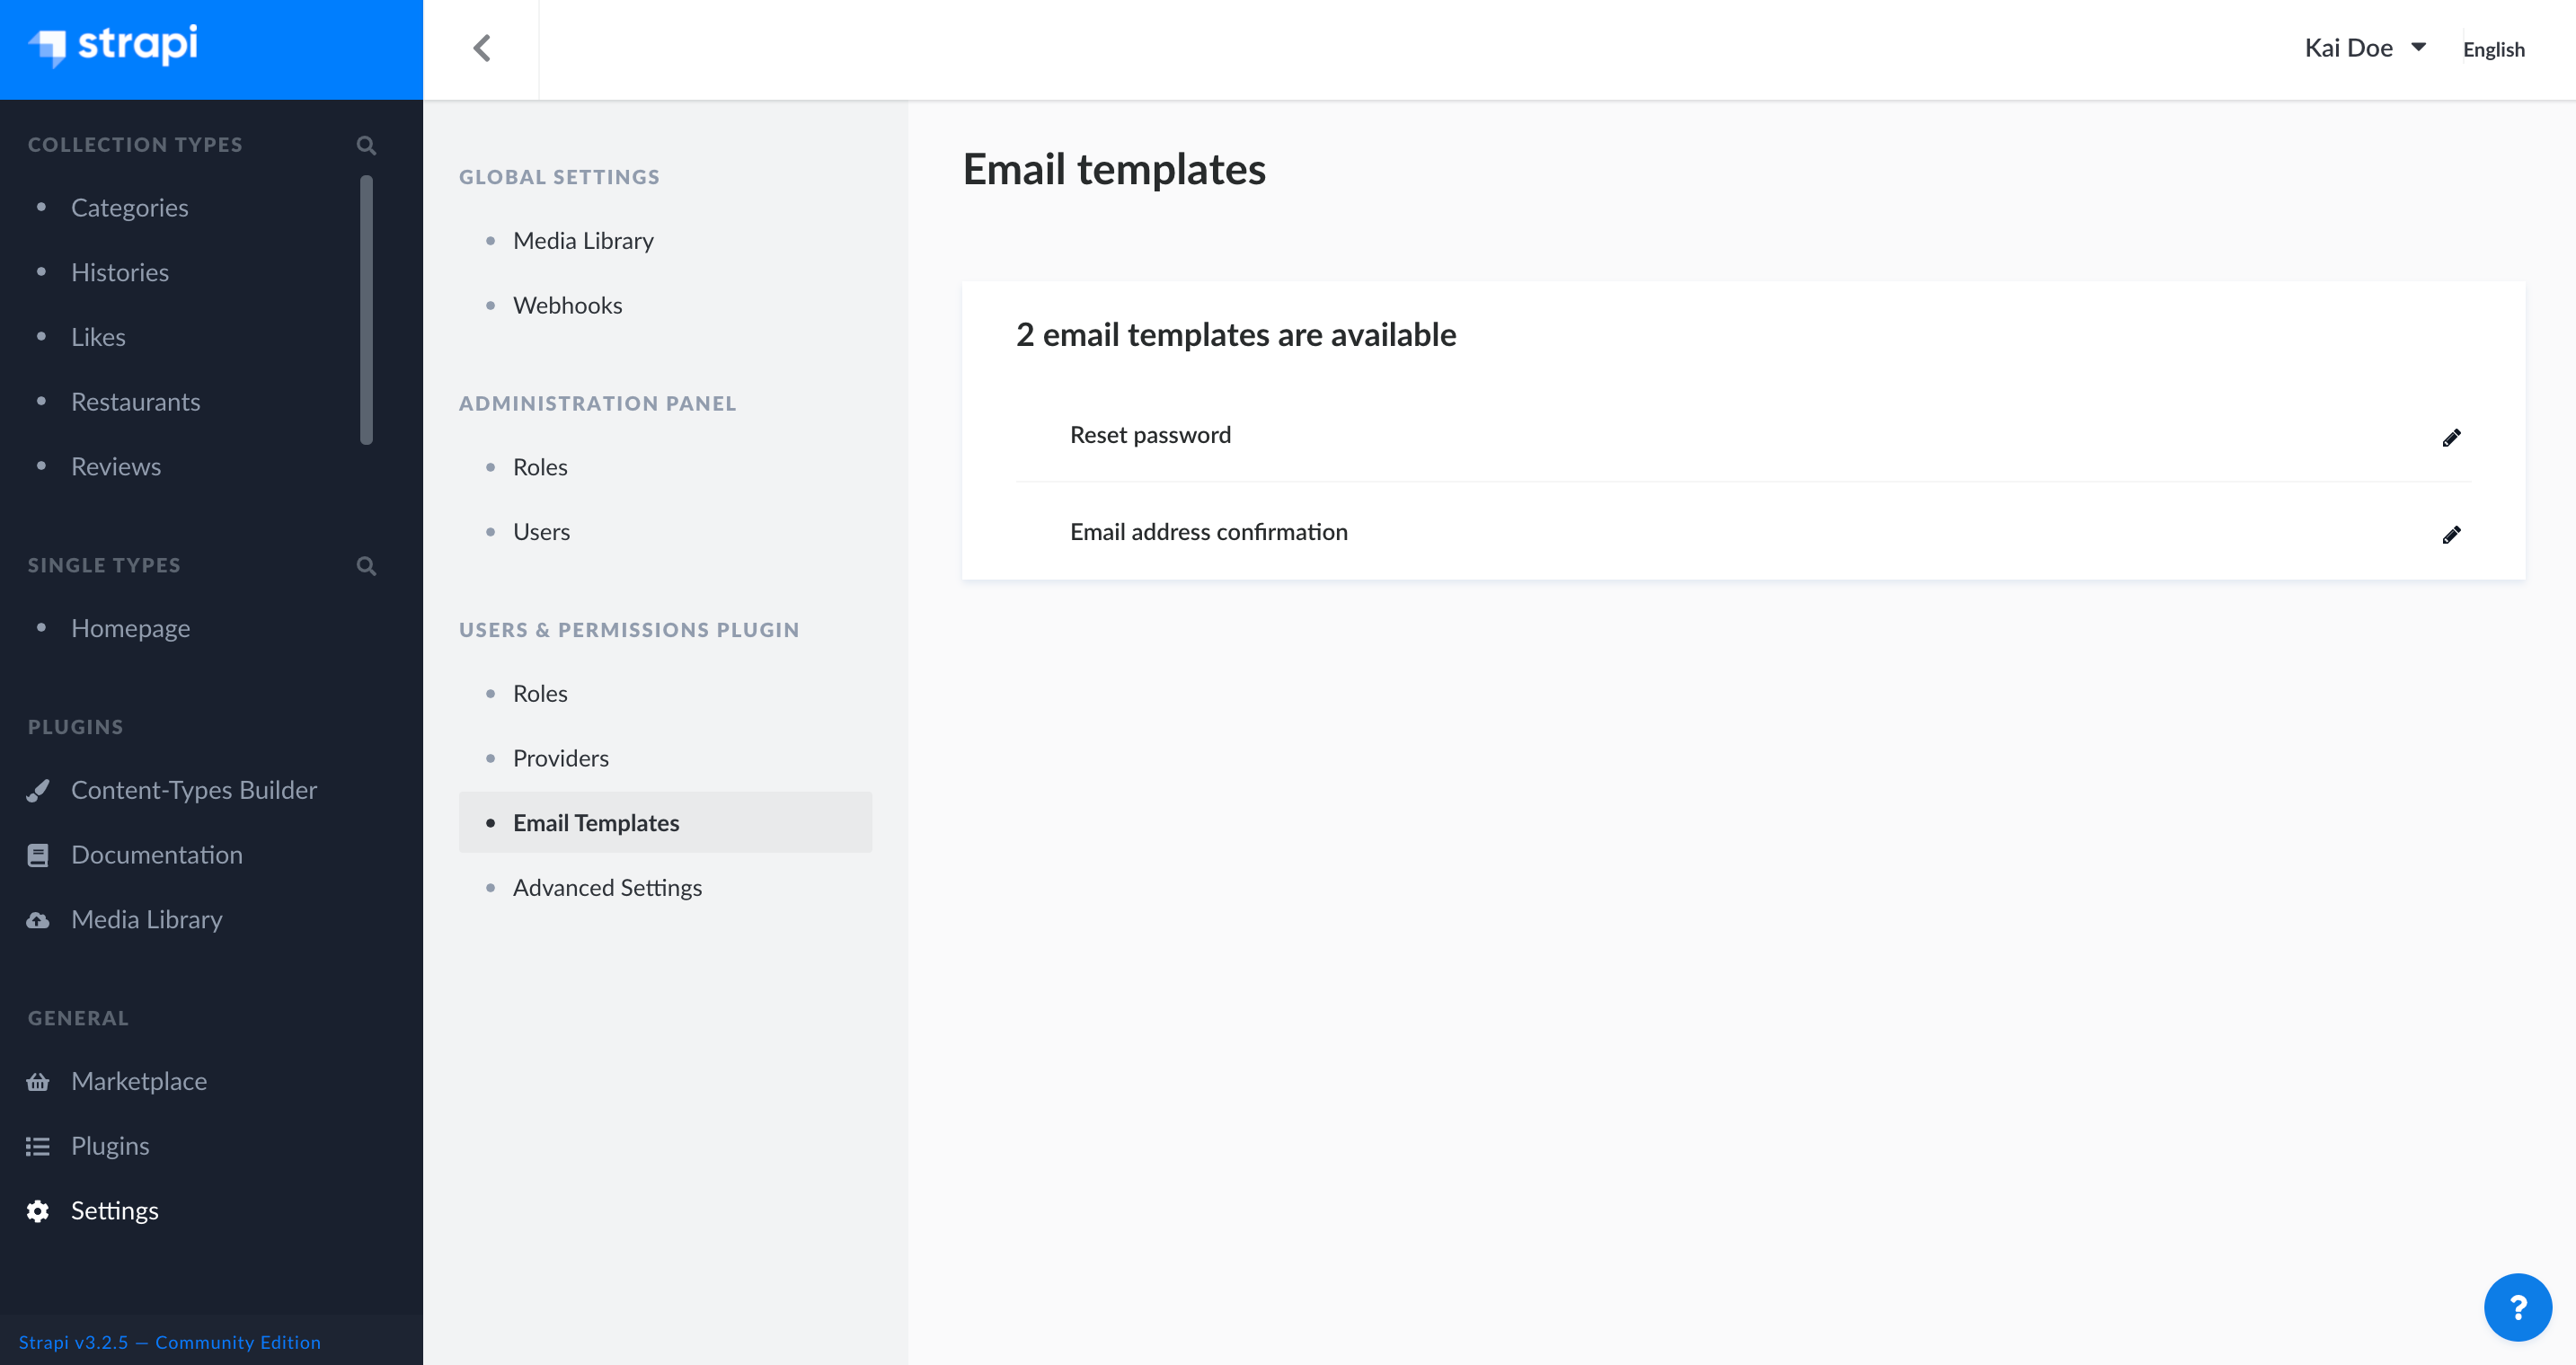 Email templates interface